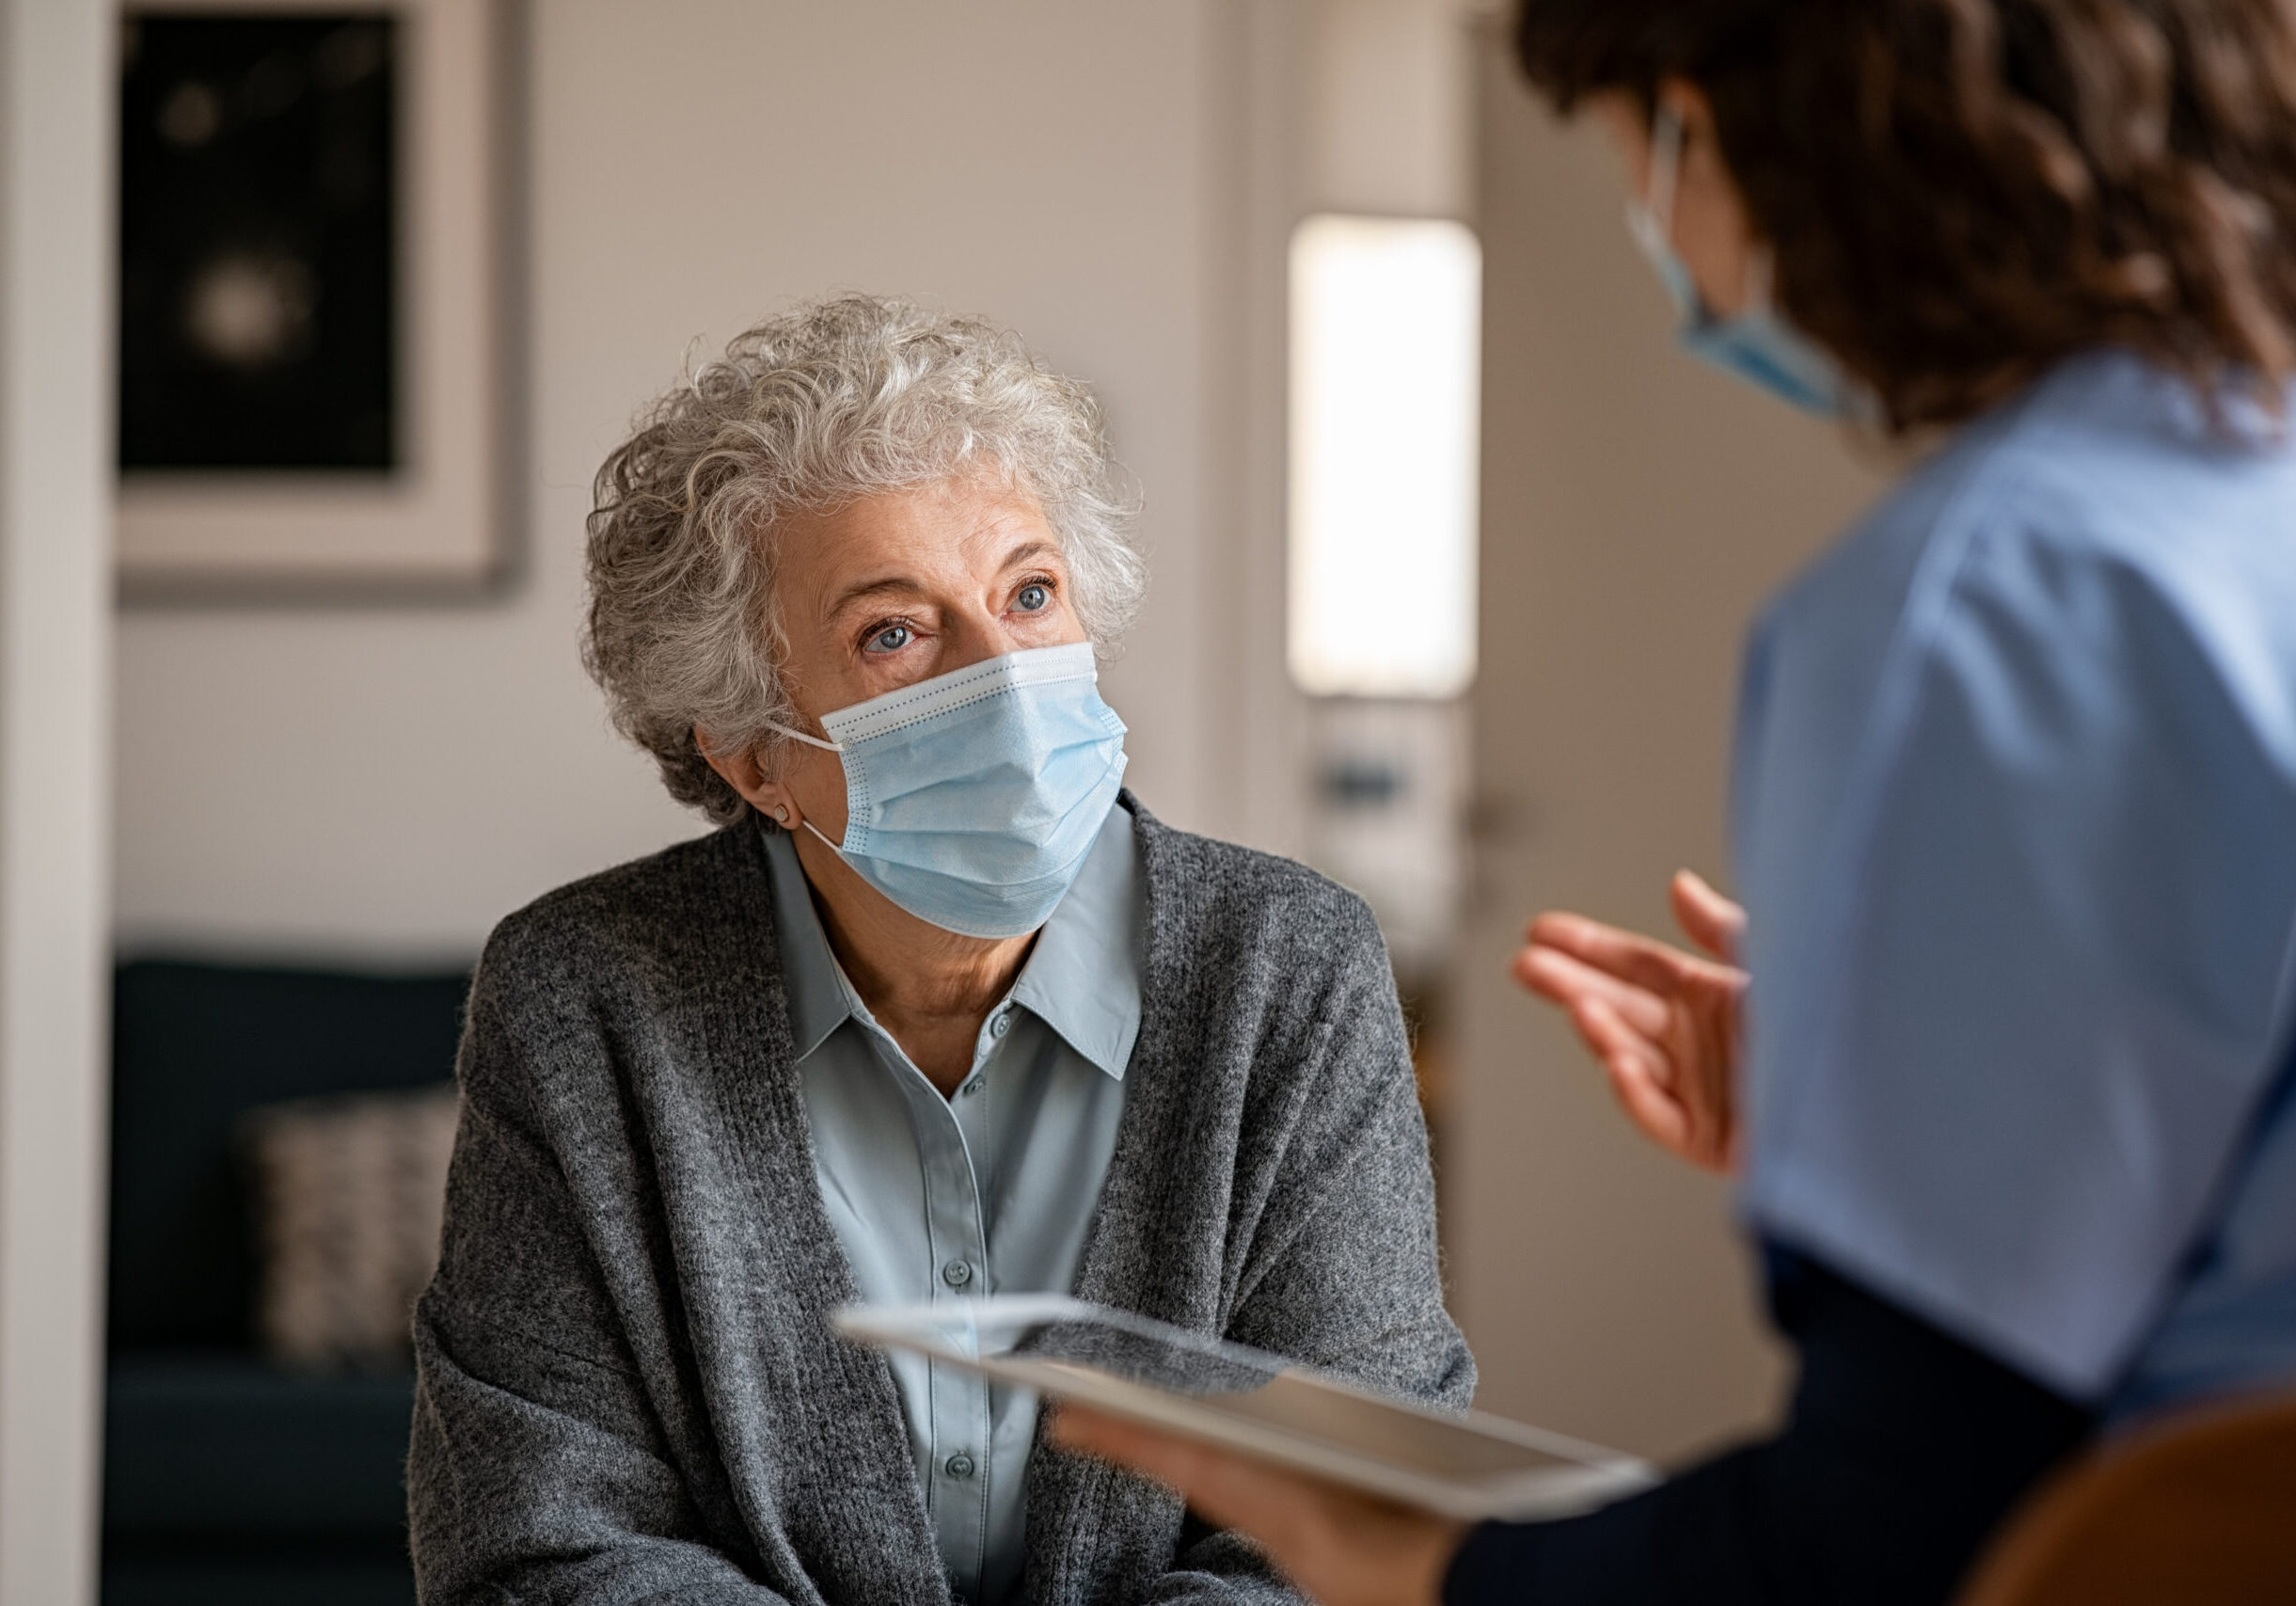 Senior woman wearing safety protective mask at home and talking to nurse holding digital tablet. Back view of young doctor visiting old woman for routine health checkup during covid-19 pandemic. Young general practitioner and elderly patient wearing face masks in a private medical consult during coronavirus and flu outbreak.